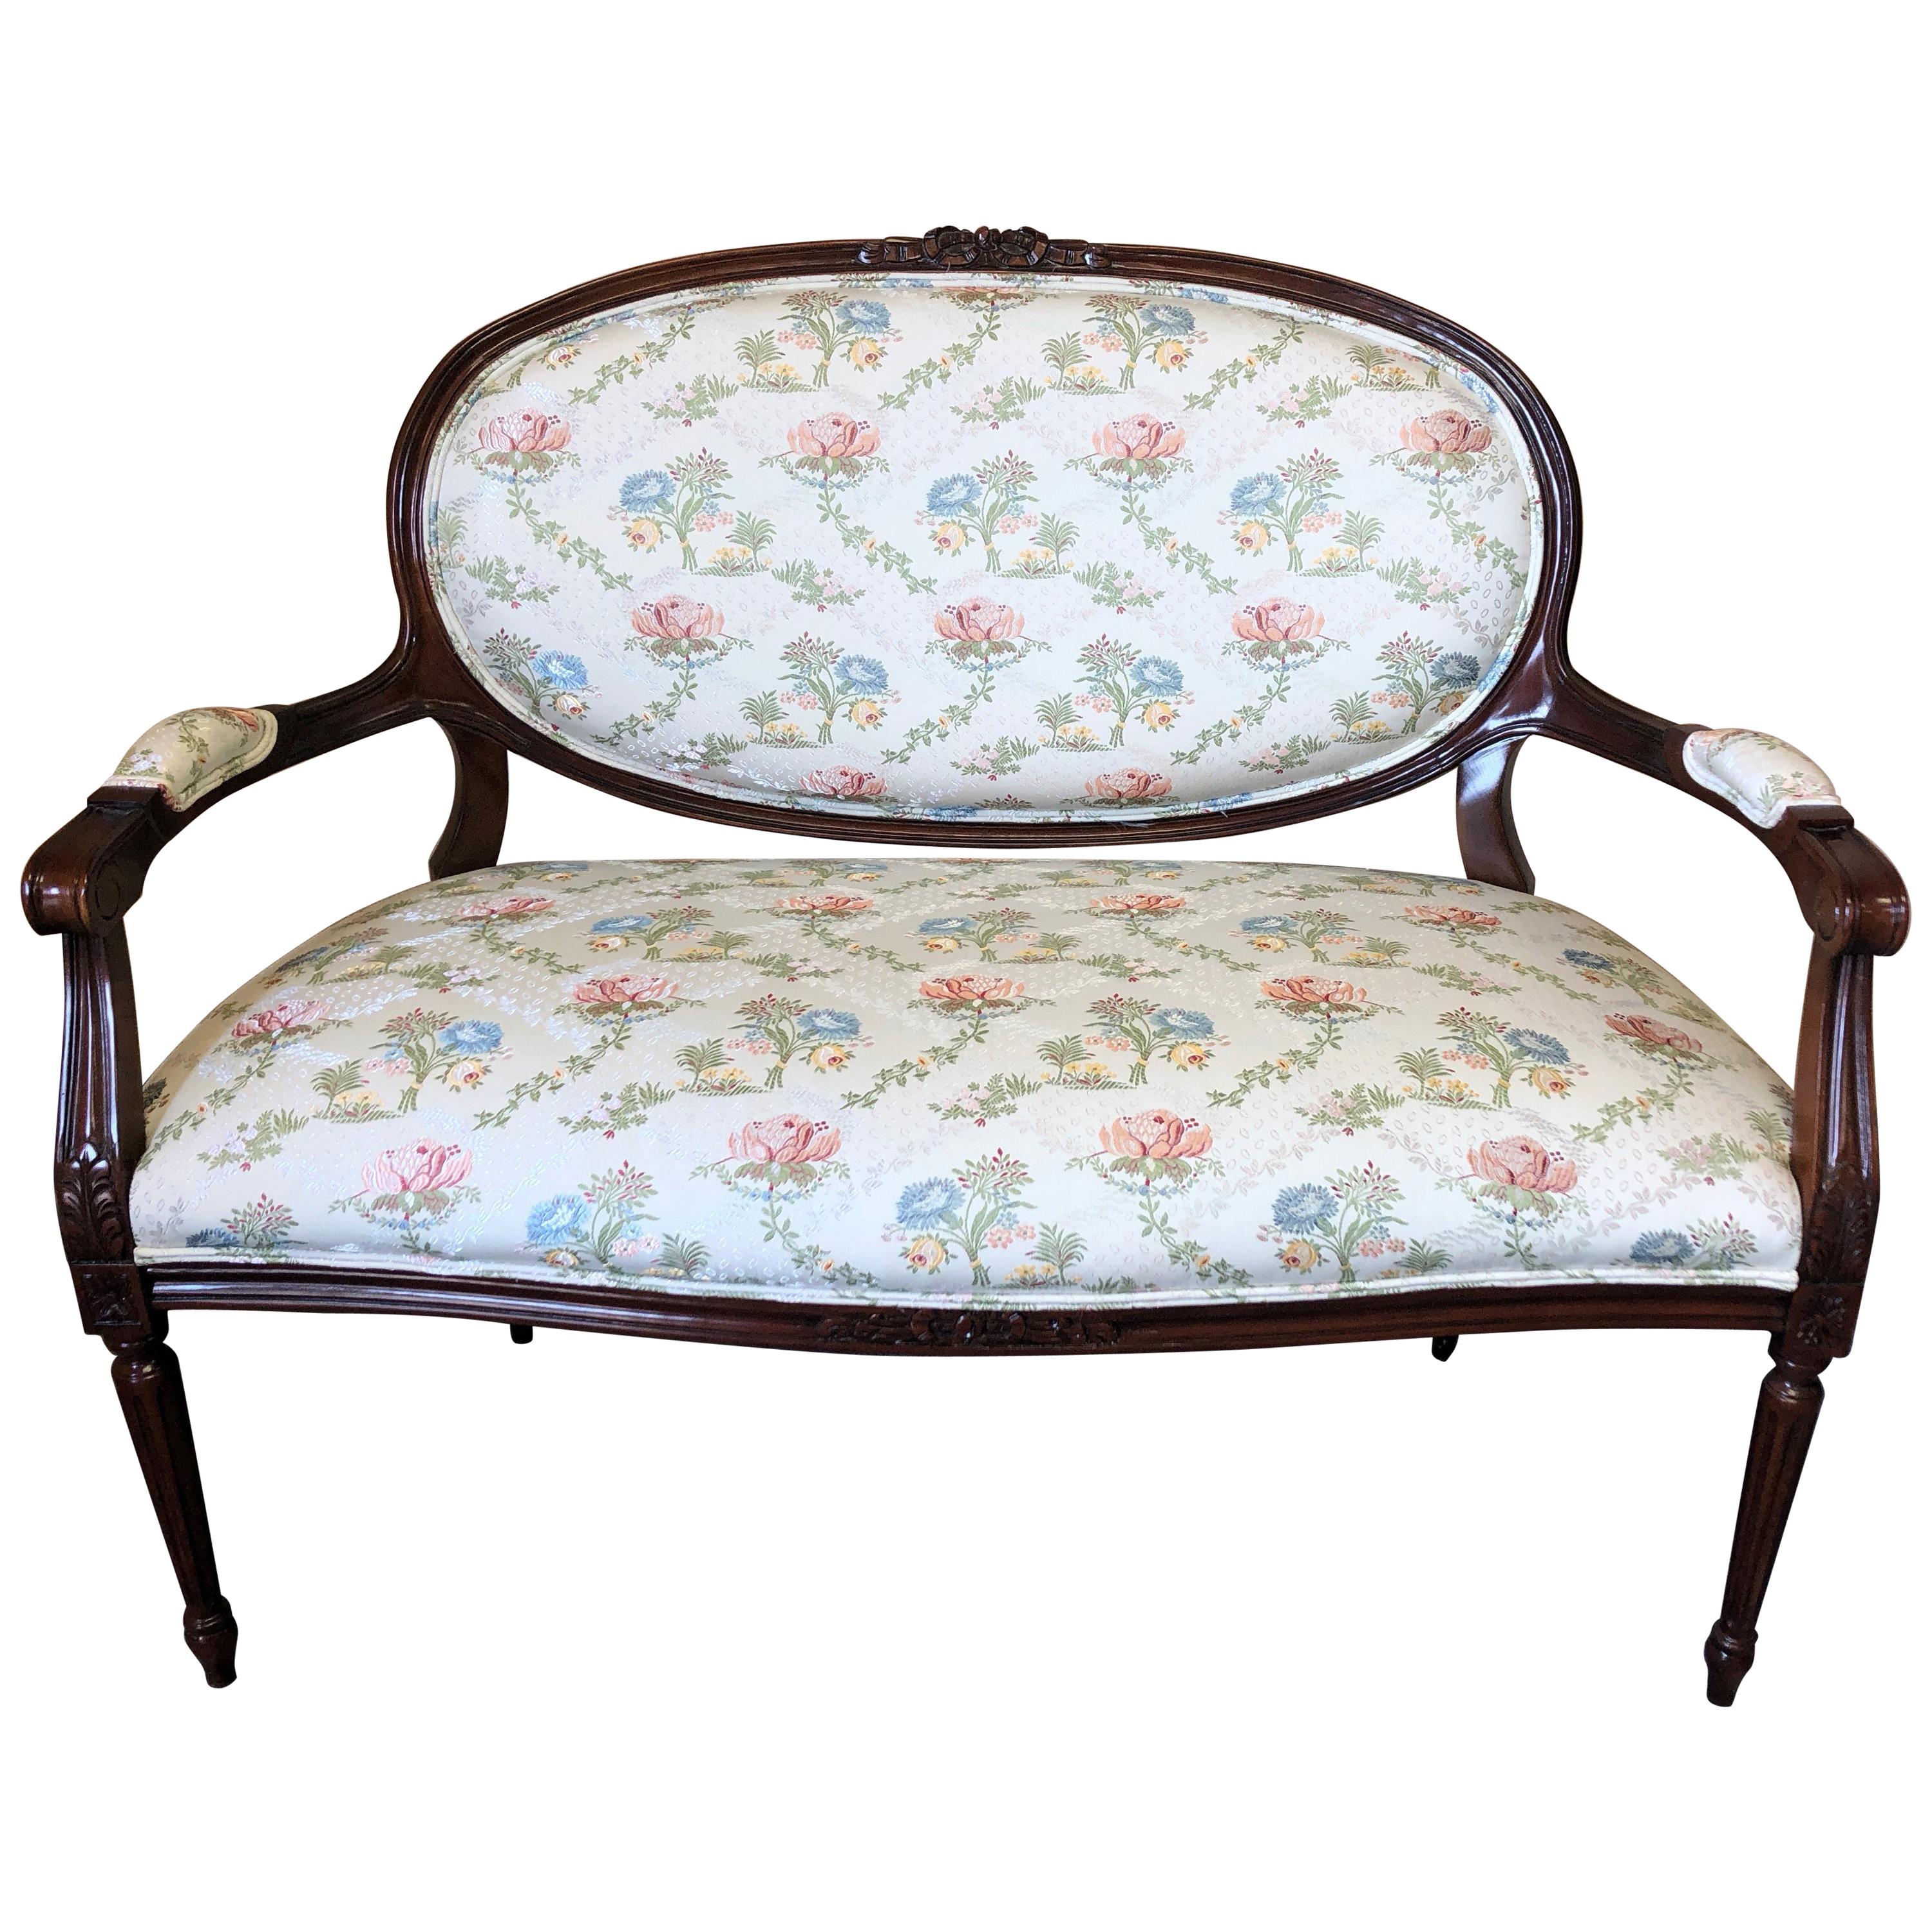 Classic Fruitwood Loveseat by Henredon with Lovely Floral Upholstery